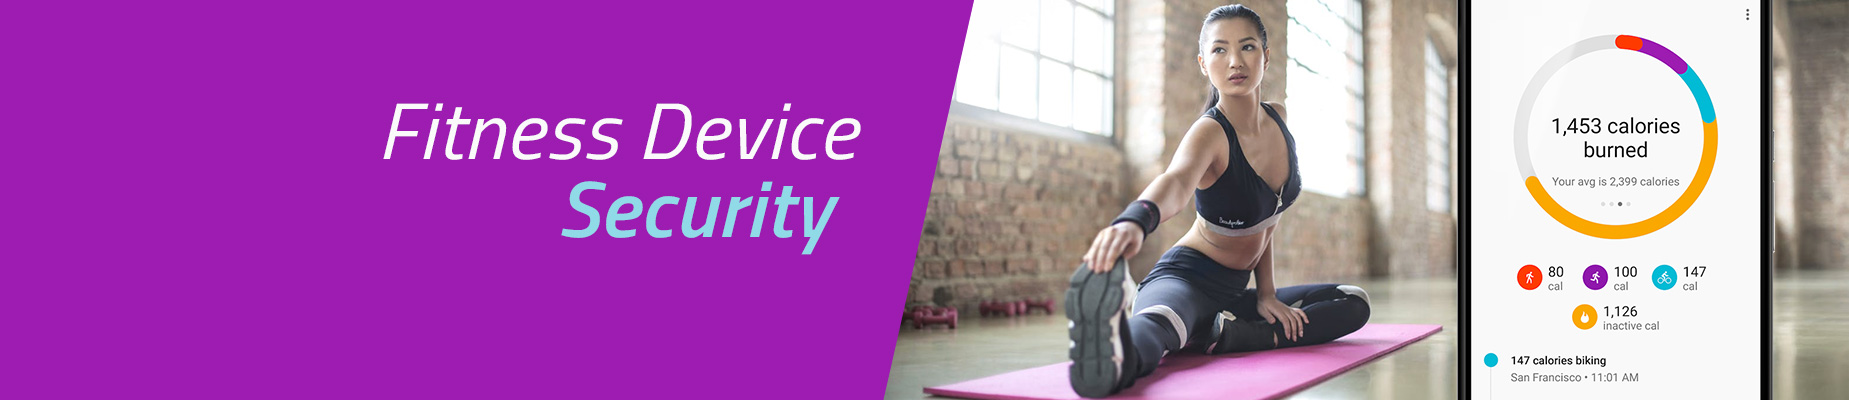 Fitness Device Security: Are you CyberFit?